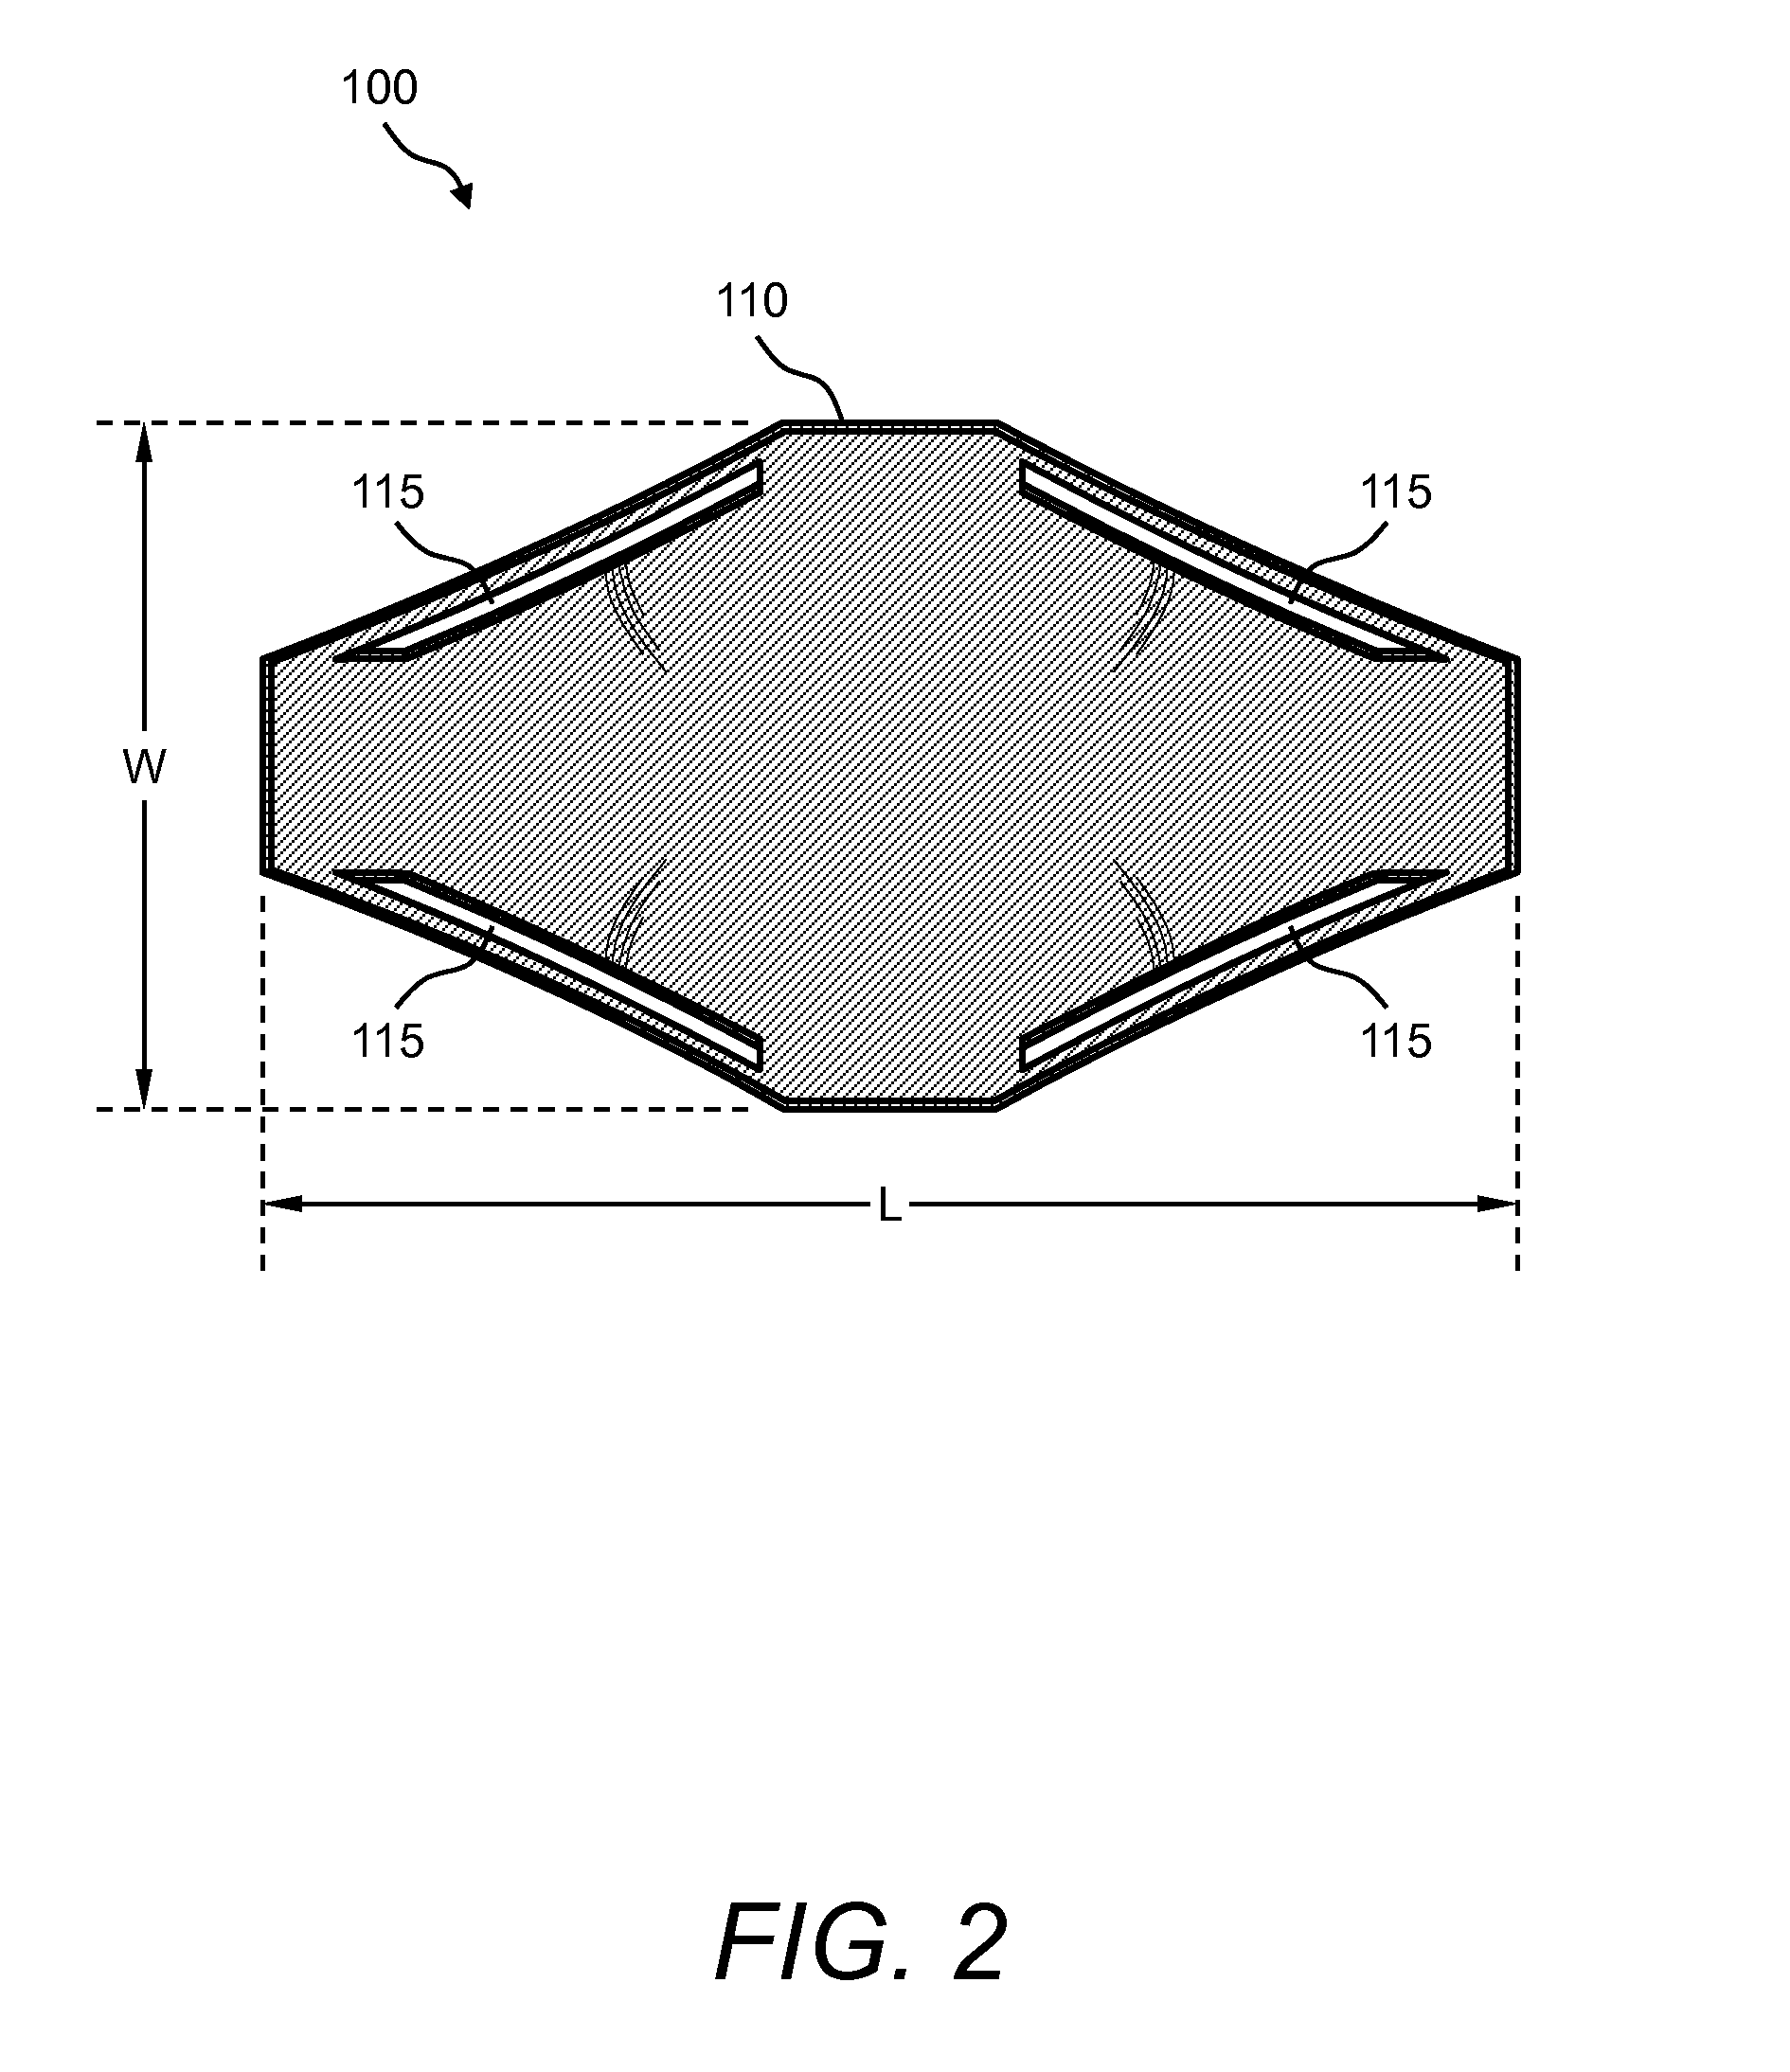 Ultrasound-detectable markers, ultrasound system, and methods for monitoring vascular flow and patency